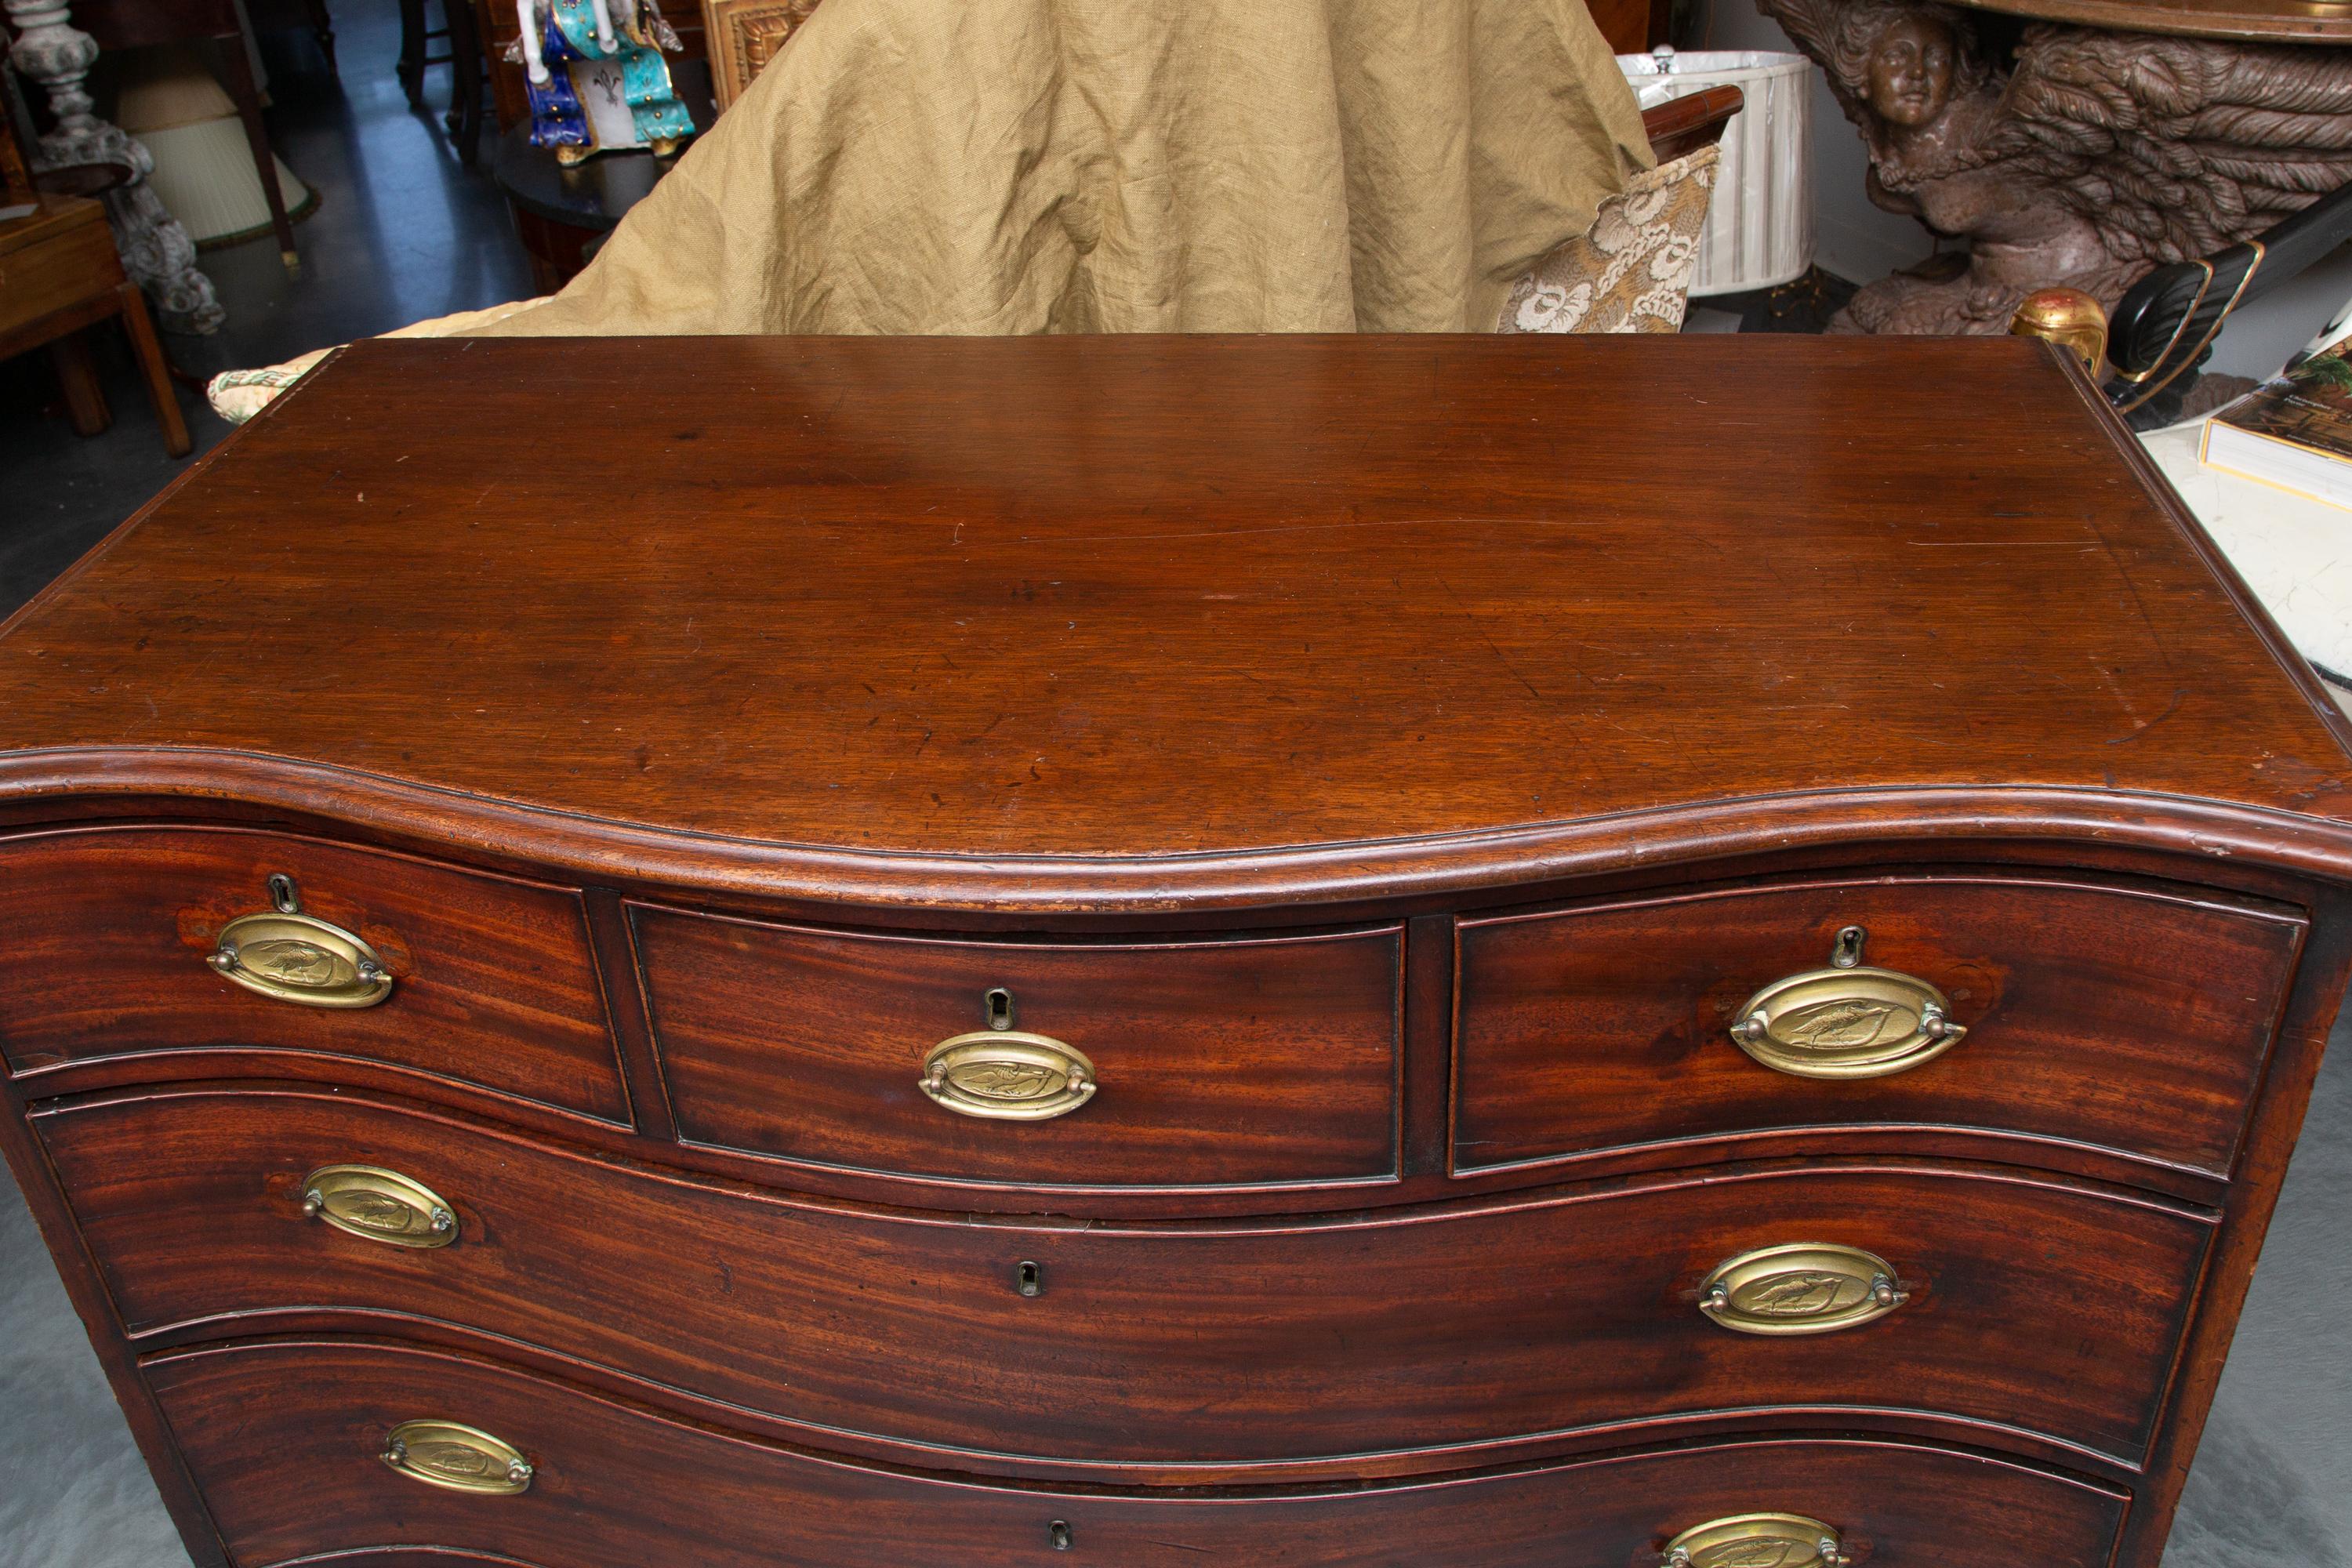 This is a classic late 18th century English George III solid mahogany serpentine chest of drawers. This lovely, mellow chest has a top with a molded edge, over three short and three long, graduated drawers. The chest of drawers is situated on shaped